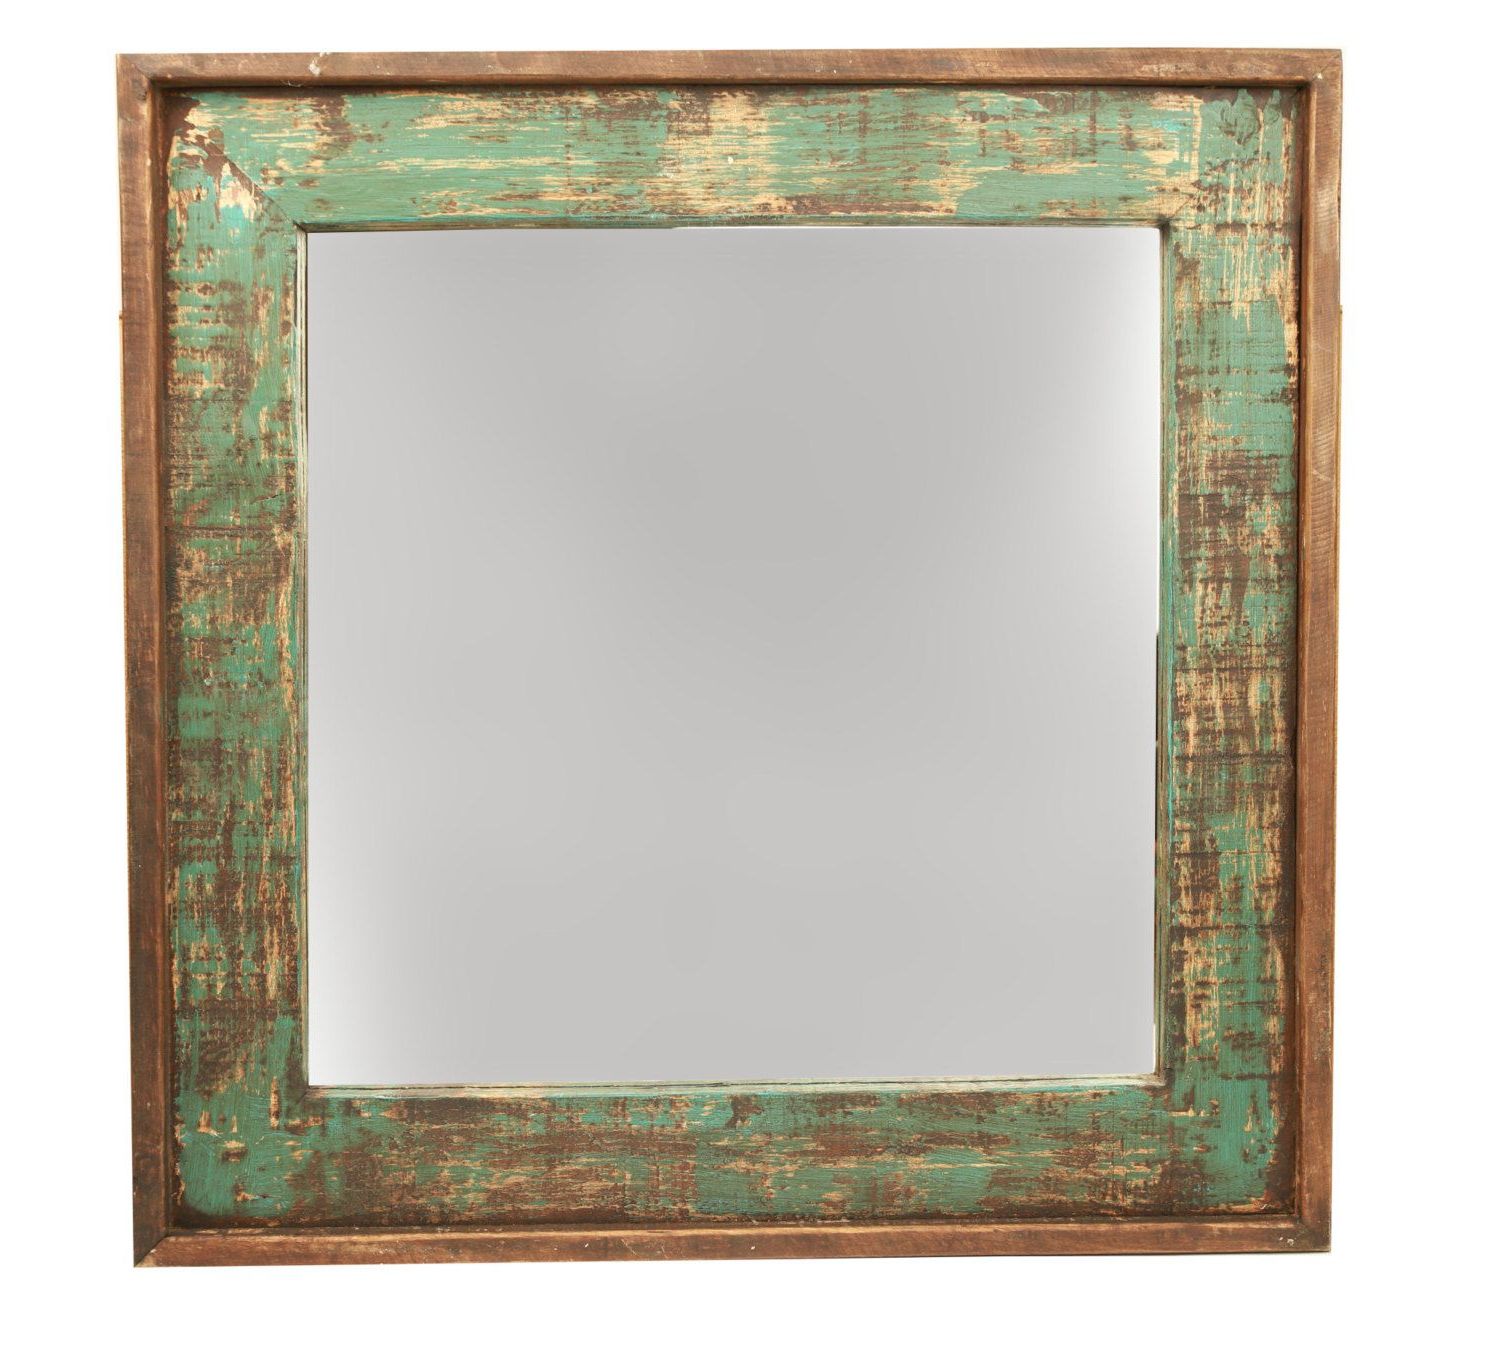 Current Ranch House Rustic Mirror 31x31 Inches Handmade Wall Mirror Within Turquoise Wall Mirrors (View 5 of 20)